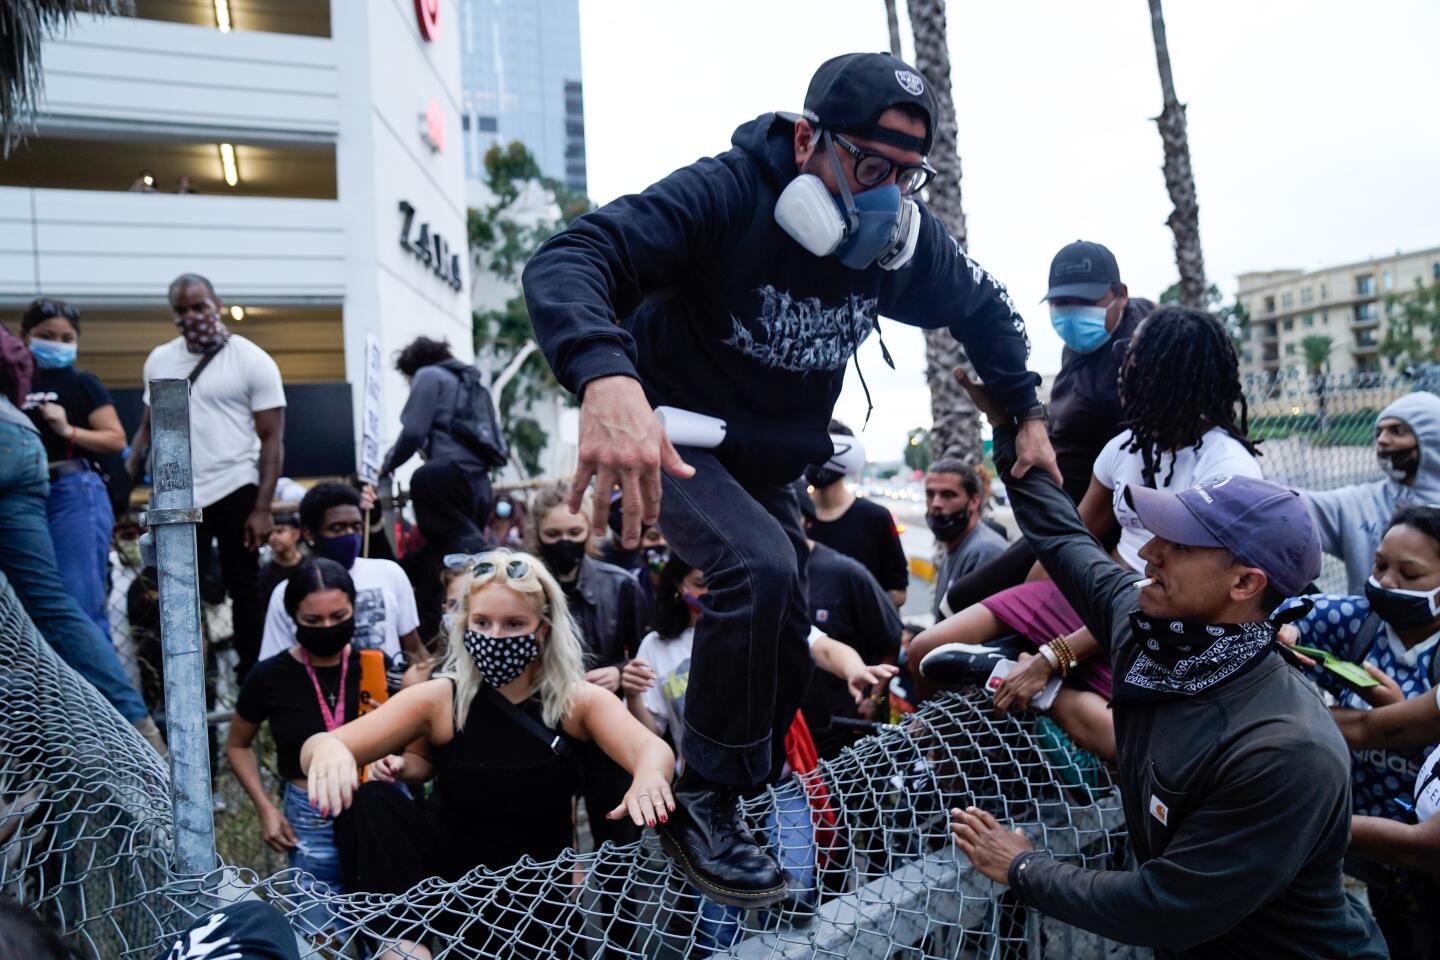 Protesters climb over a barrier during the May 29 protest in downtown L.A.